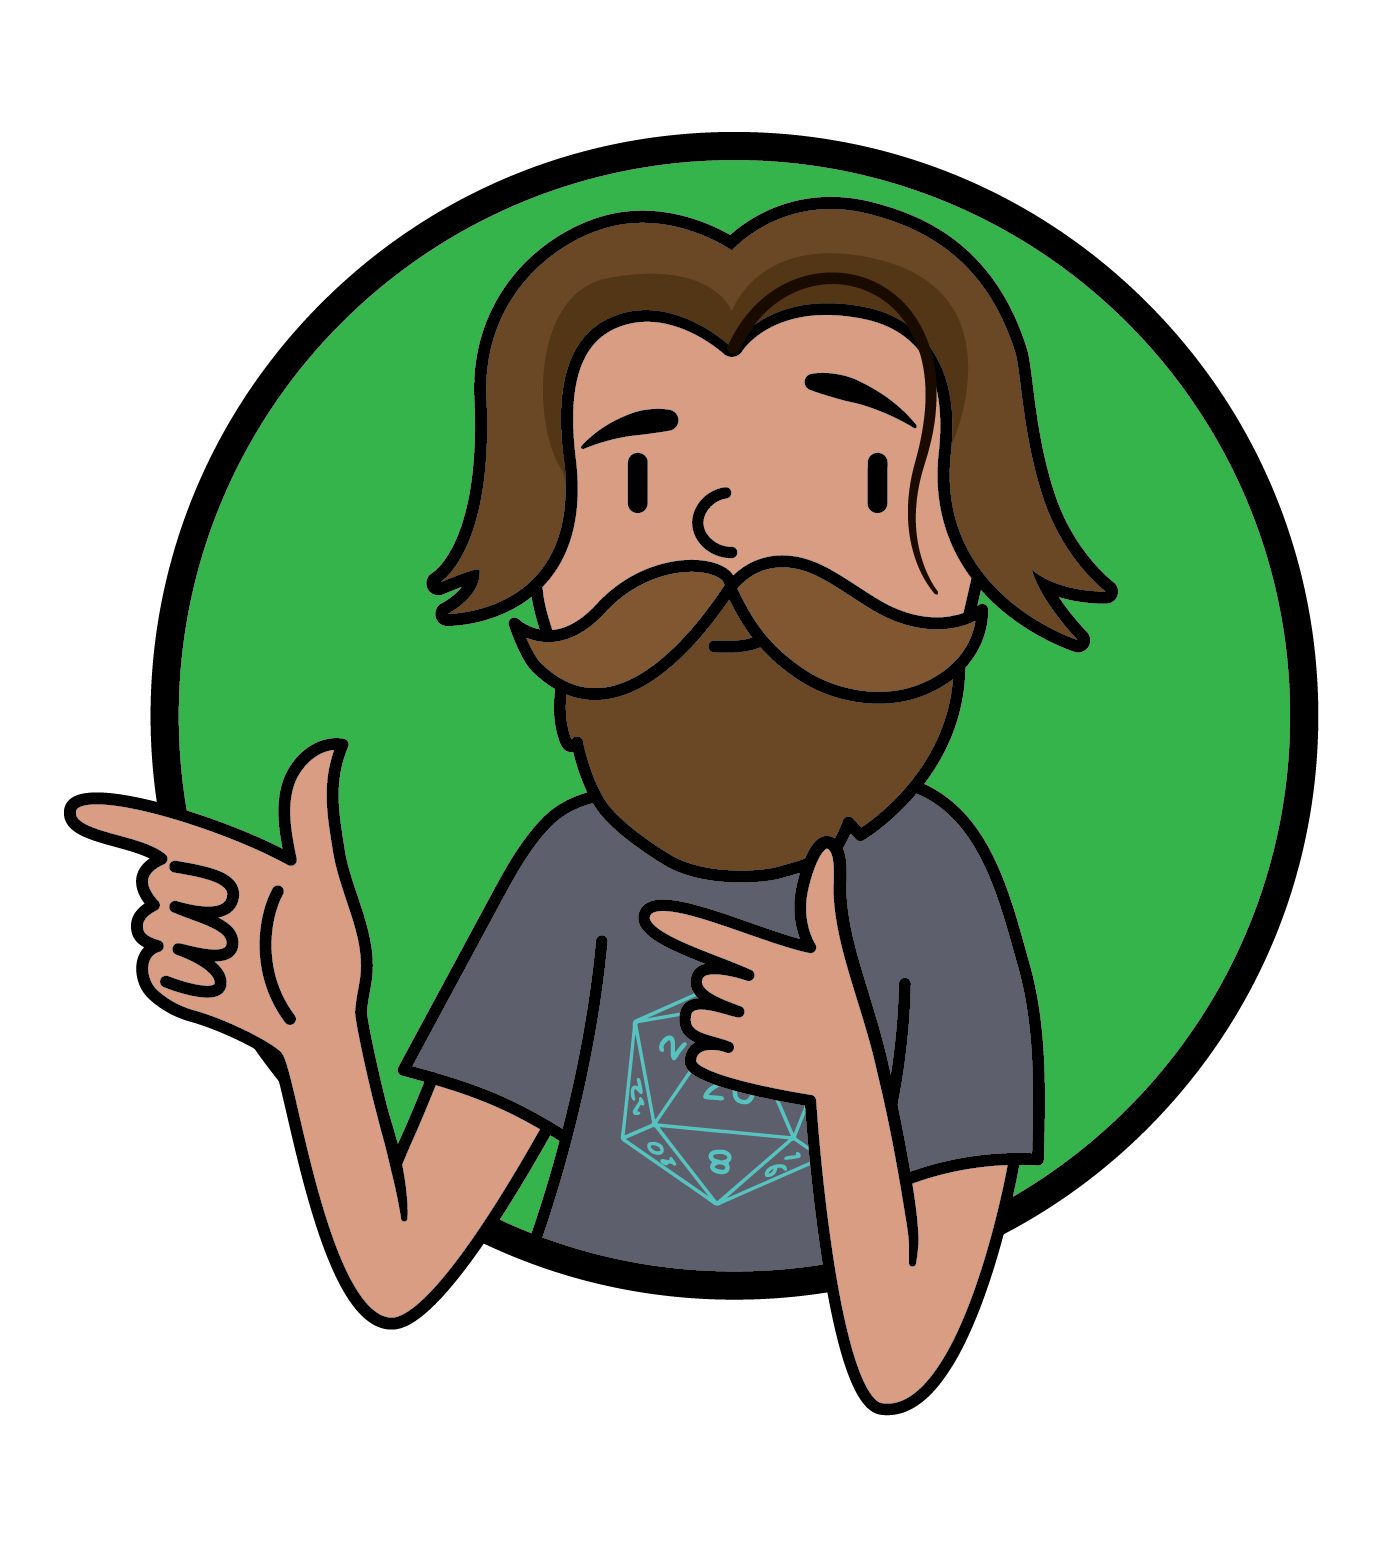 A cartoon image of David, with double finger guns and wearing a d20 shirt with the 20 side facing out. His robust beard his a critical hit, and if it were a d20, it would show 20 on every side.